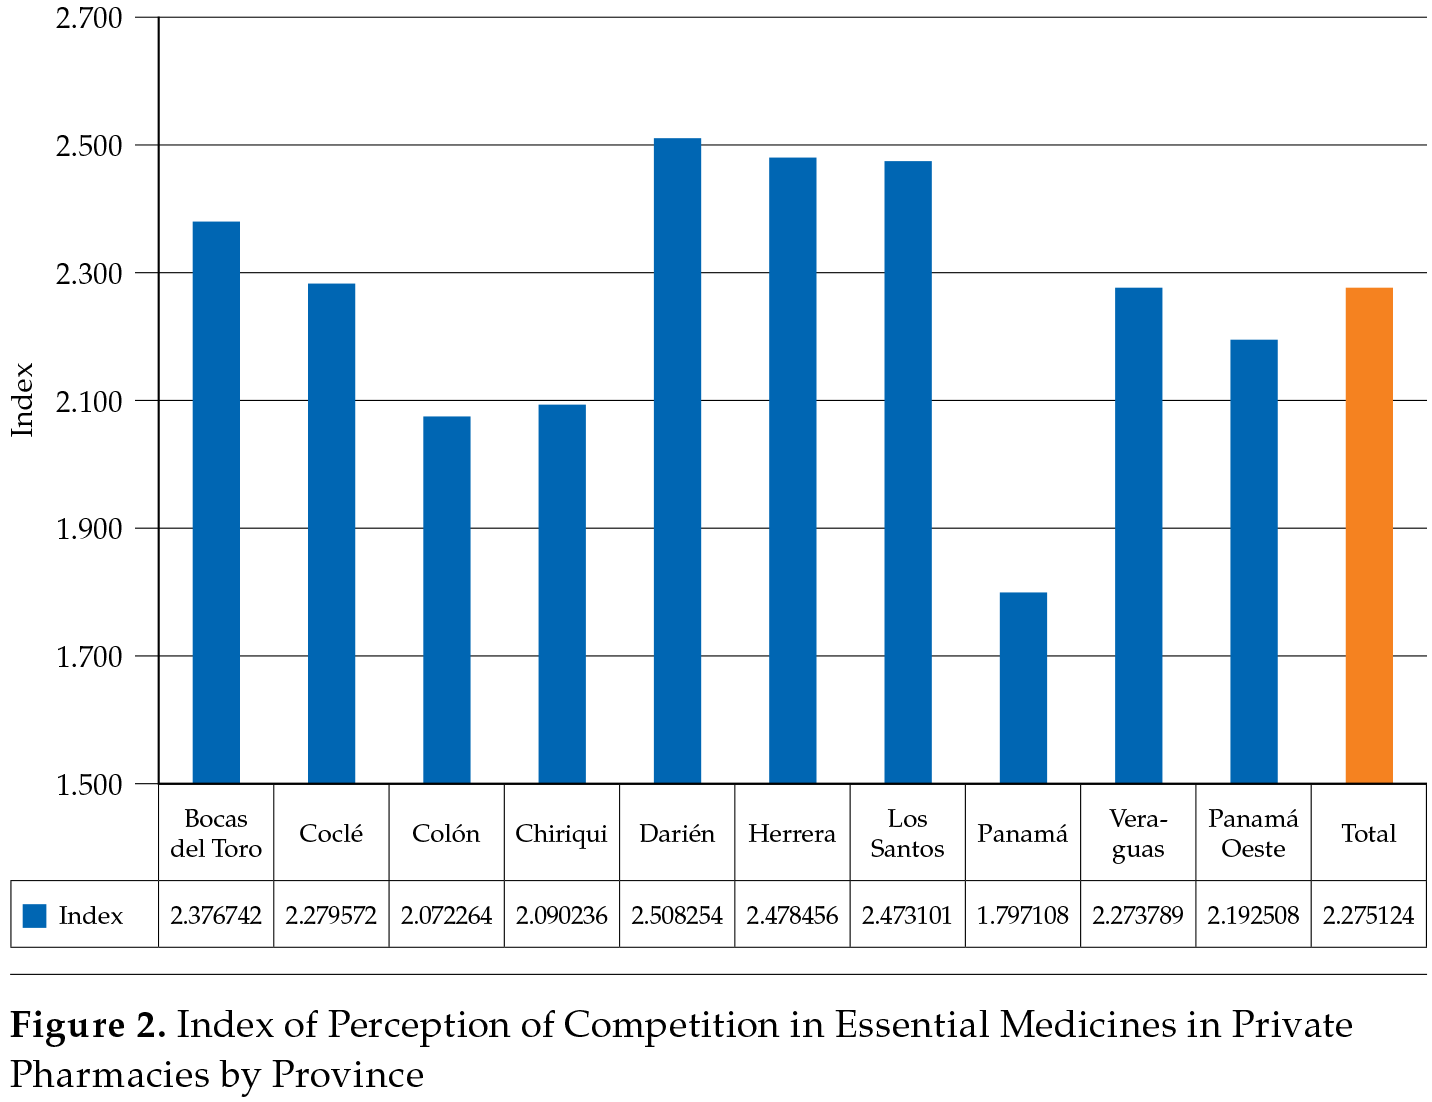 Index of Perception of Competition in Essential Medicines in Private Pharmacies by Province